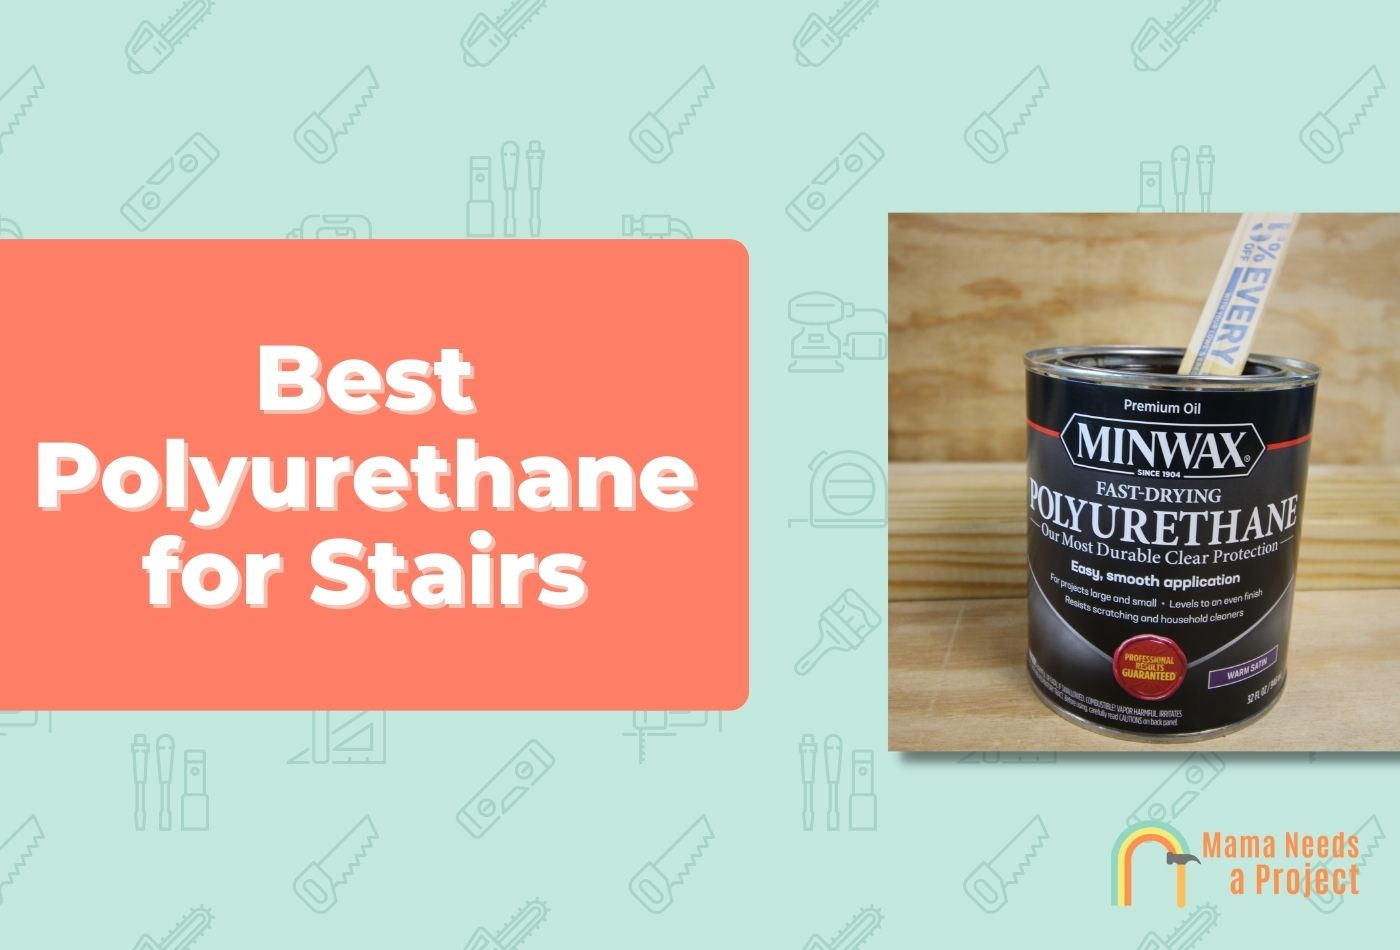 Best Polyurethane for Stairs